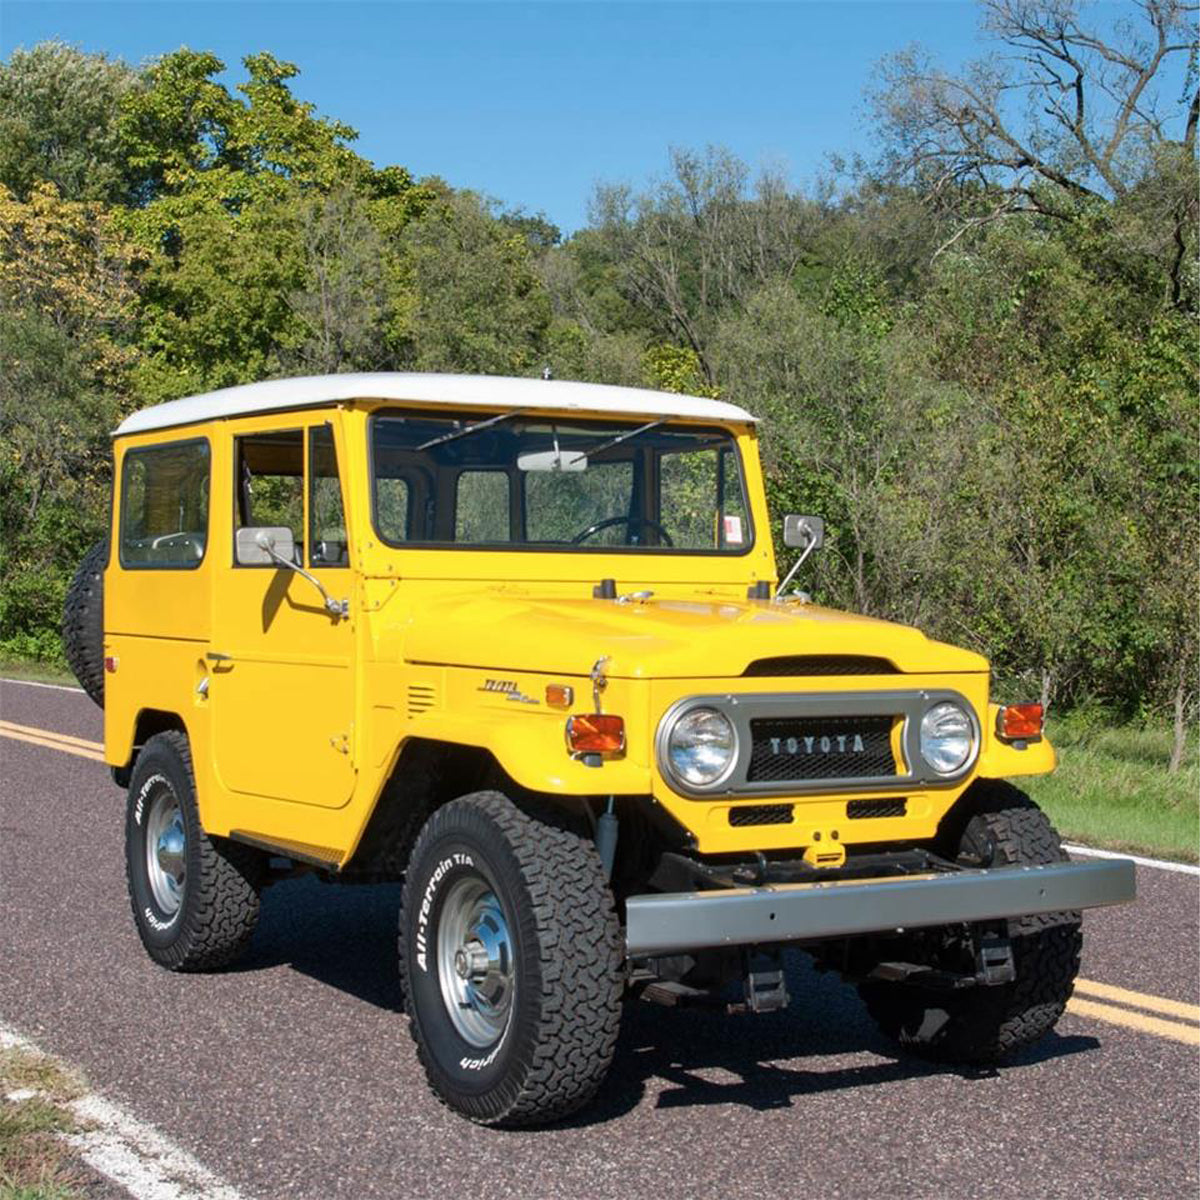 SOPHIA'S 75-78 Complete Cab with Doors, with Body work and CUSTOM paint., for FJ40 Toyota Land Cruiser